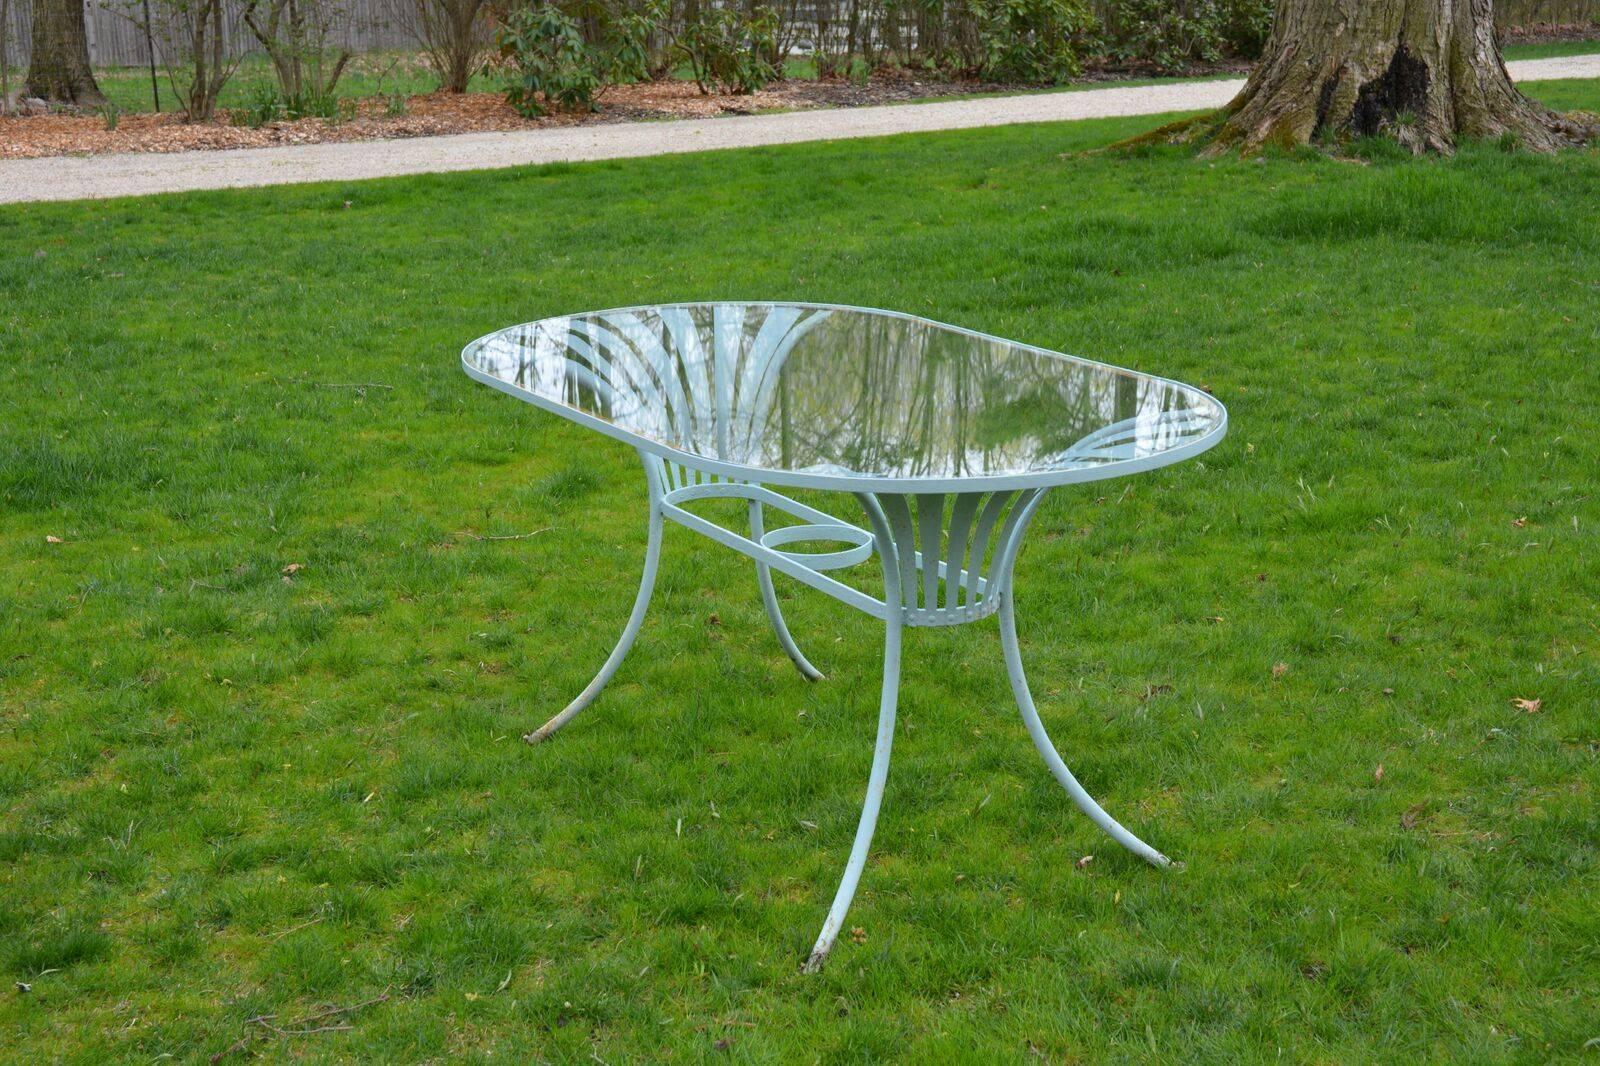 Metalwork Dining Table and Chairs of Spring Steel